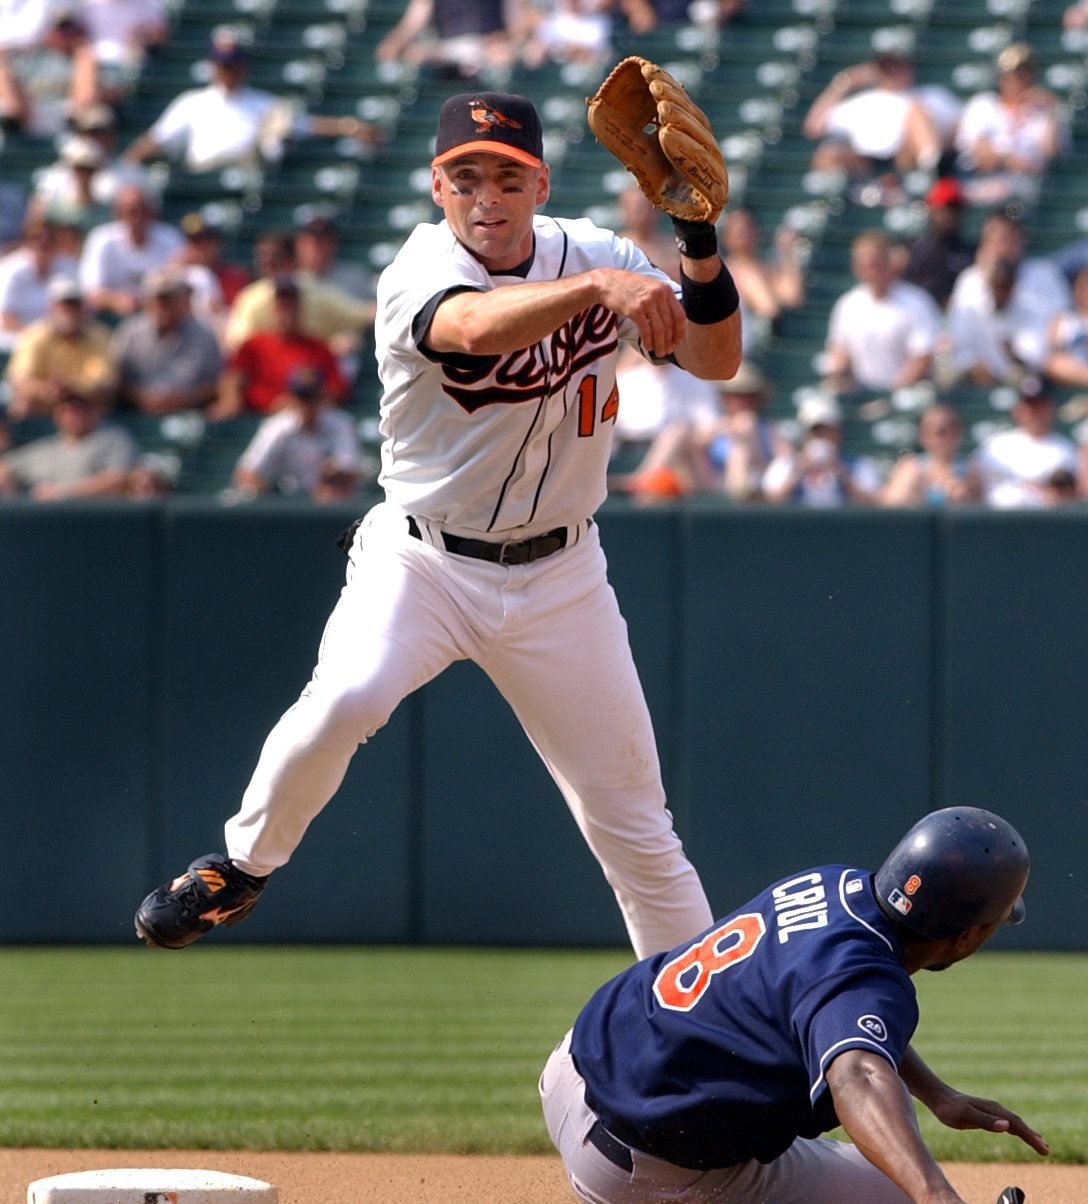 BALTIMORE -- 6/12/02 -- Baltimore Orioles vs. San Diego Padres at Camden Yards: Mike Bordick completes a double play over Deivi Cruz after replacing Melvin Mora as short stop in the seventh inning. Mora was thrown out of the game for tossing his bat in the sixth inning. staff/Elizabeth Malby